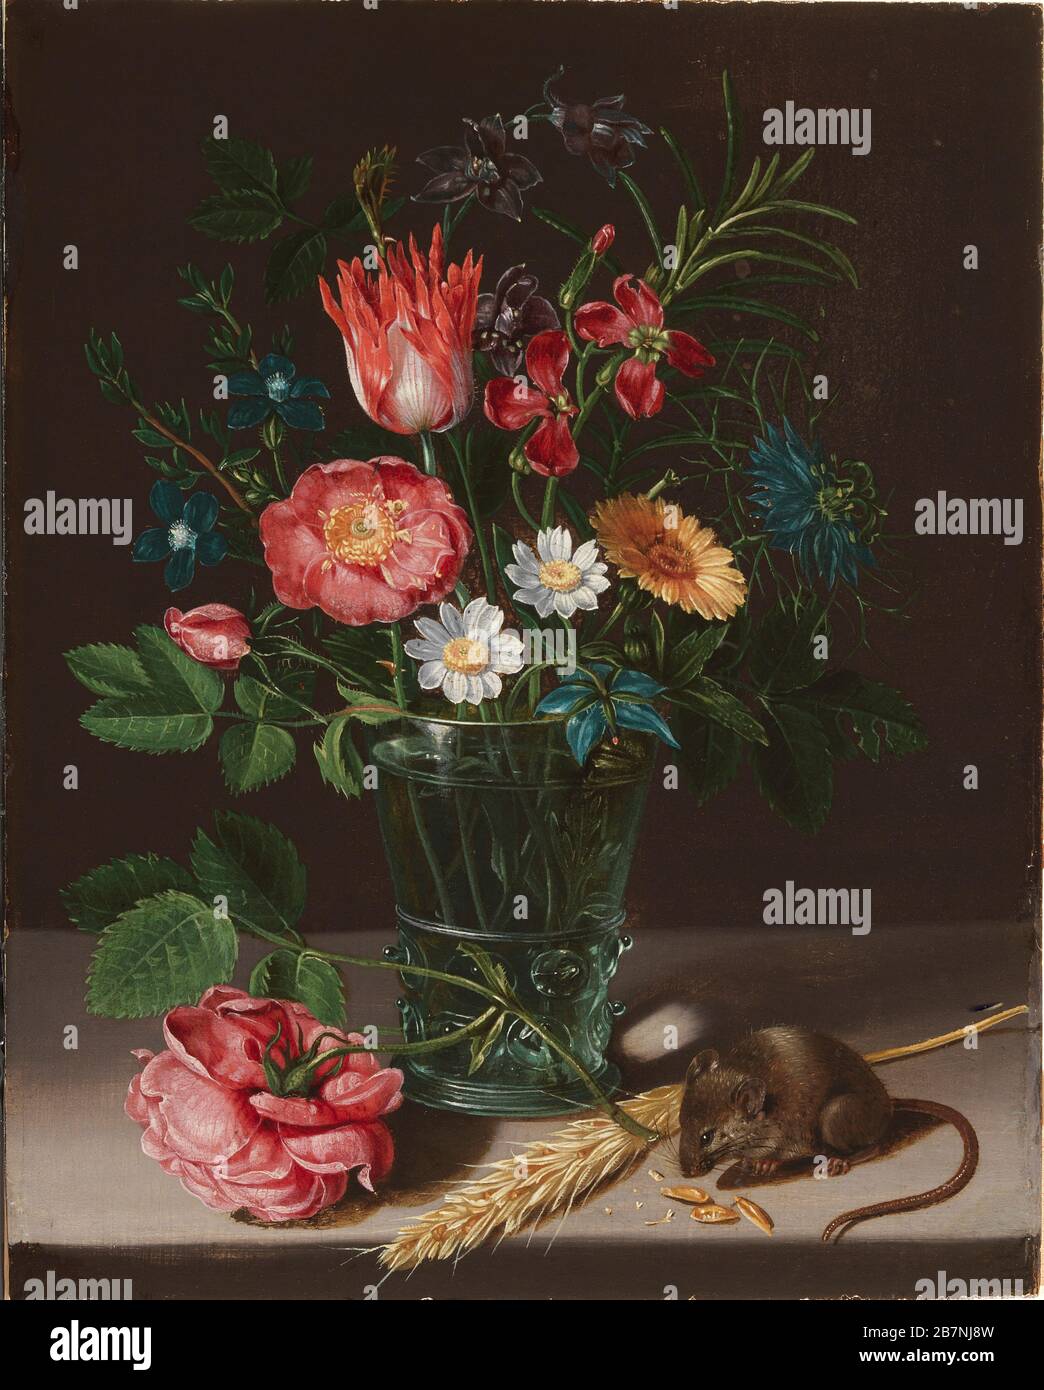 Flowers in a vase with a nibbling mouse. Found in the Collection of Museum Mayer van den Bergh, Antwerp. Stock Photo